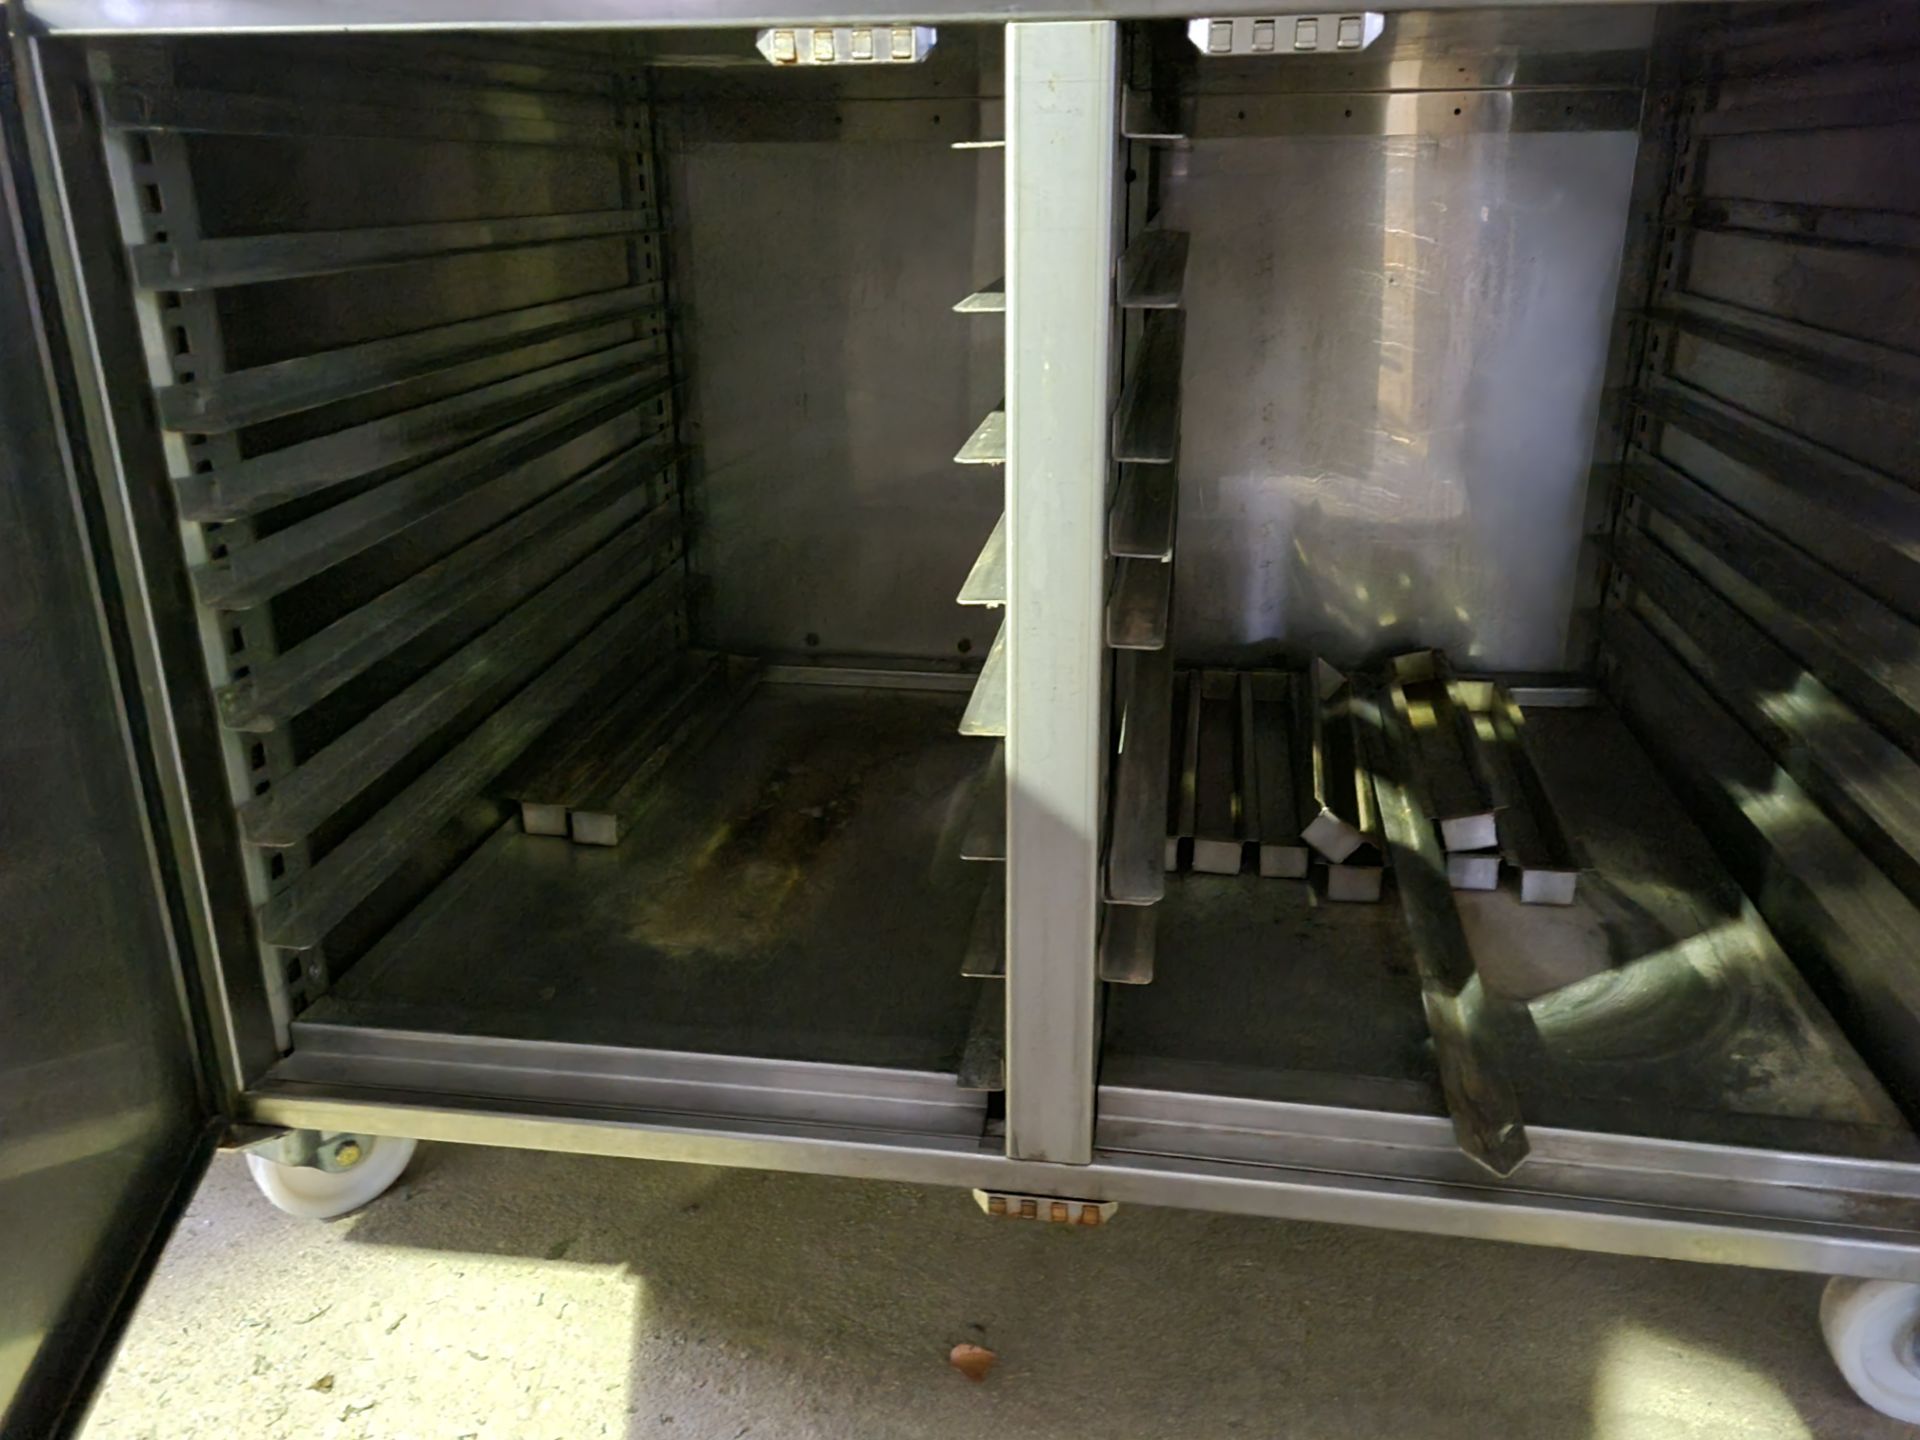 2 Deck Electric Oven with Twin cooling cabinets below with 8 x rack shelves, 1400 x 1600 x 1850 - Image 7 of 8